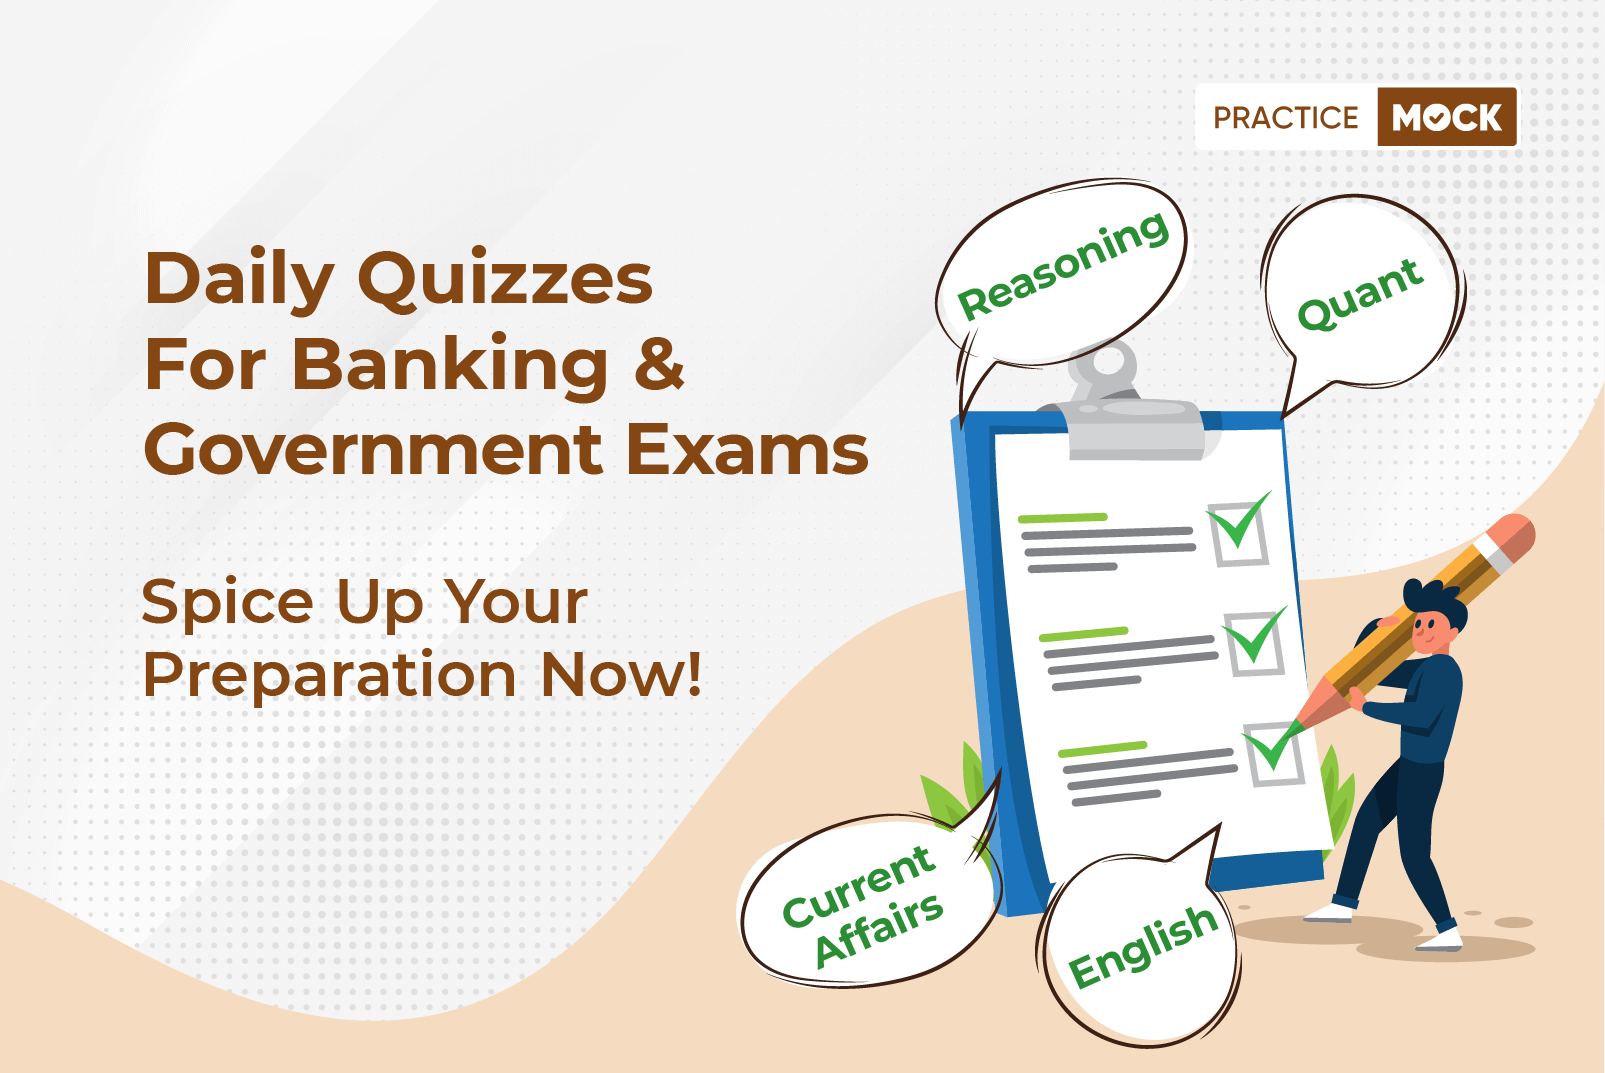 Daily Quantitative Aptitude Reasoning English Current Affairs Quizzes for Banking & Government Exams